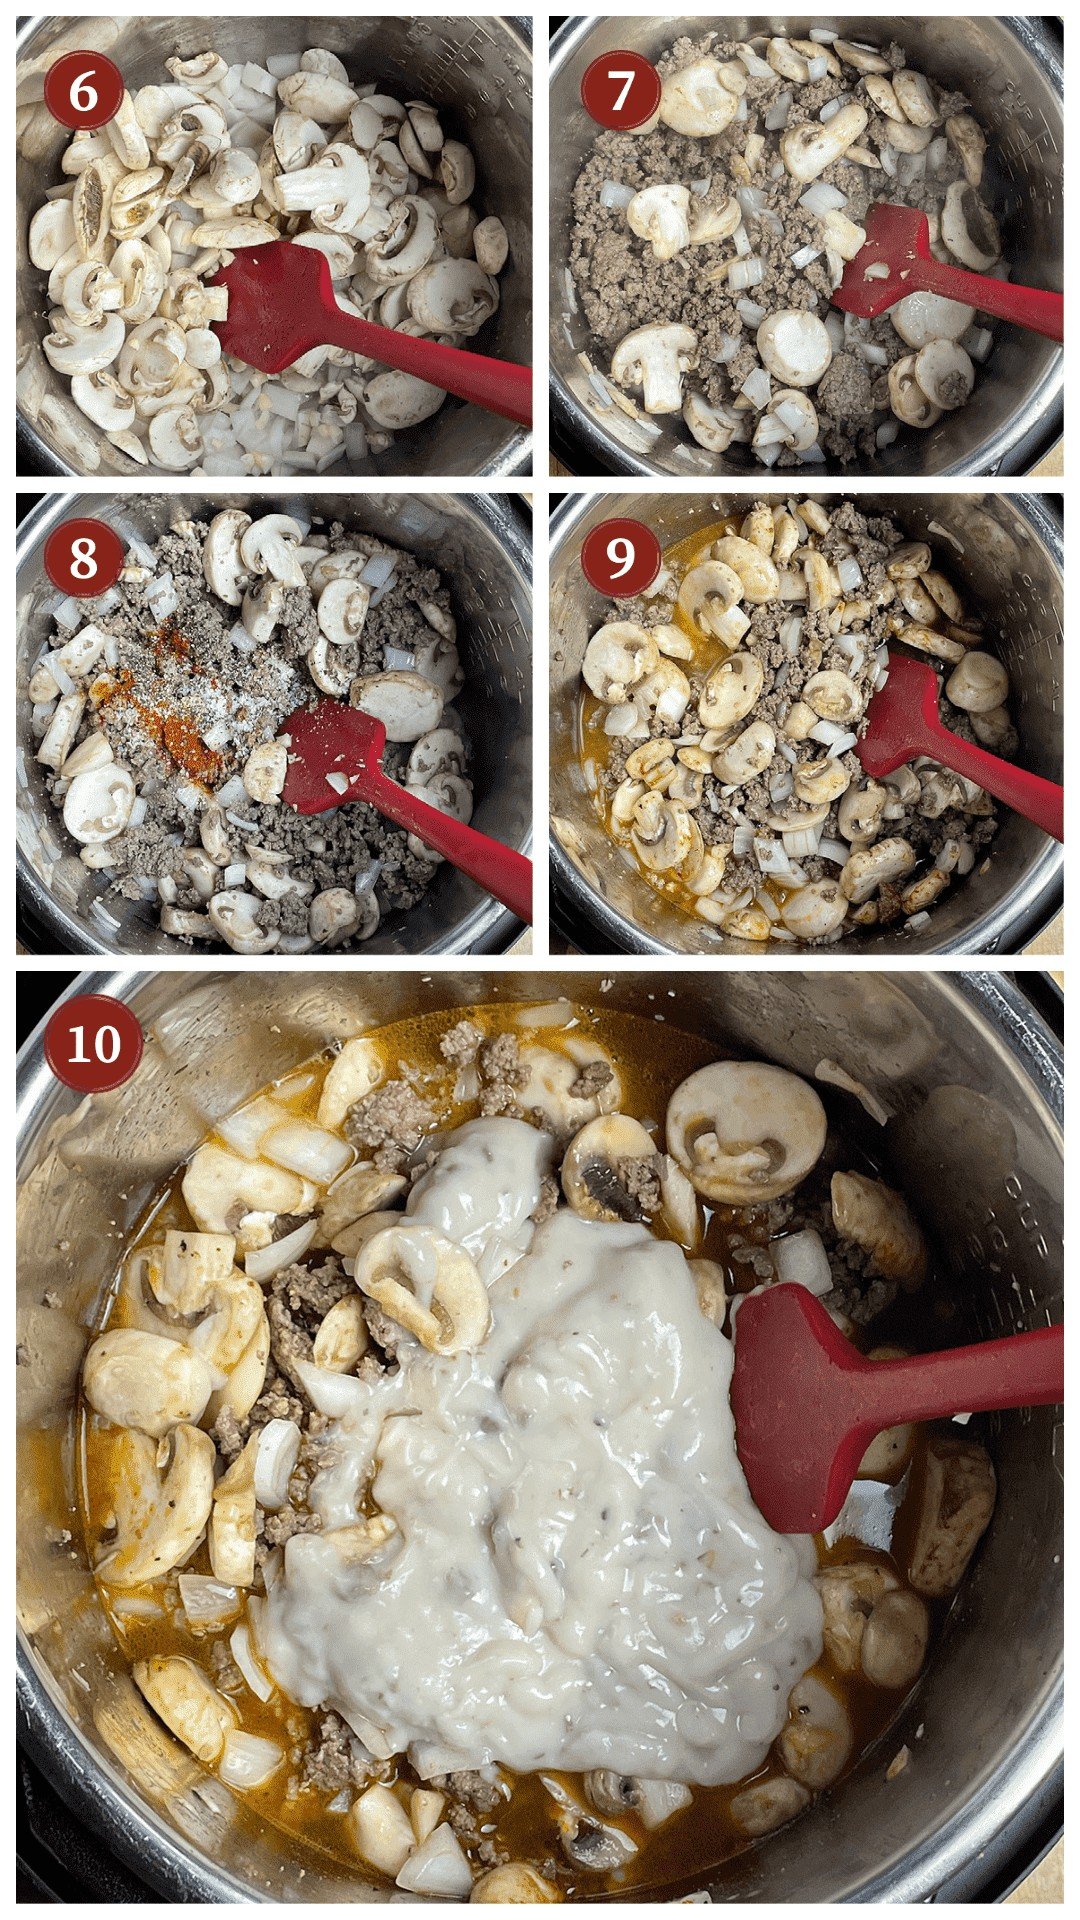 A collage of images showing how to make instant pot ground beef stroganoff, steps 6 - 10.